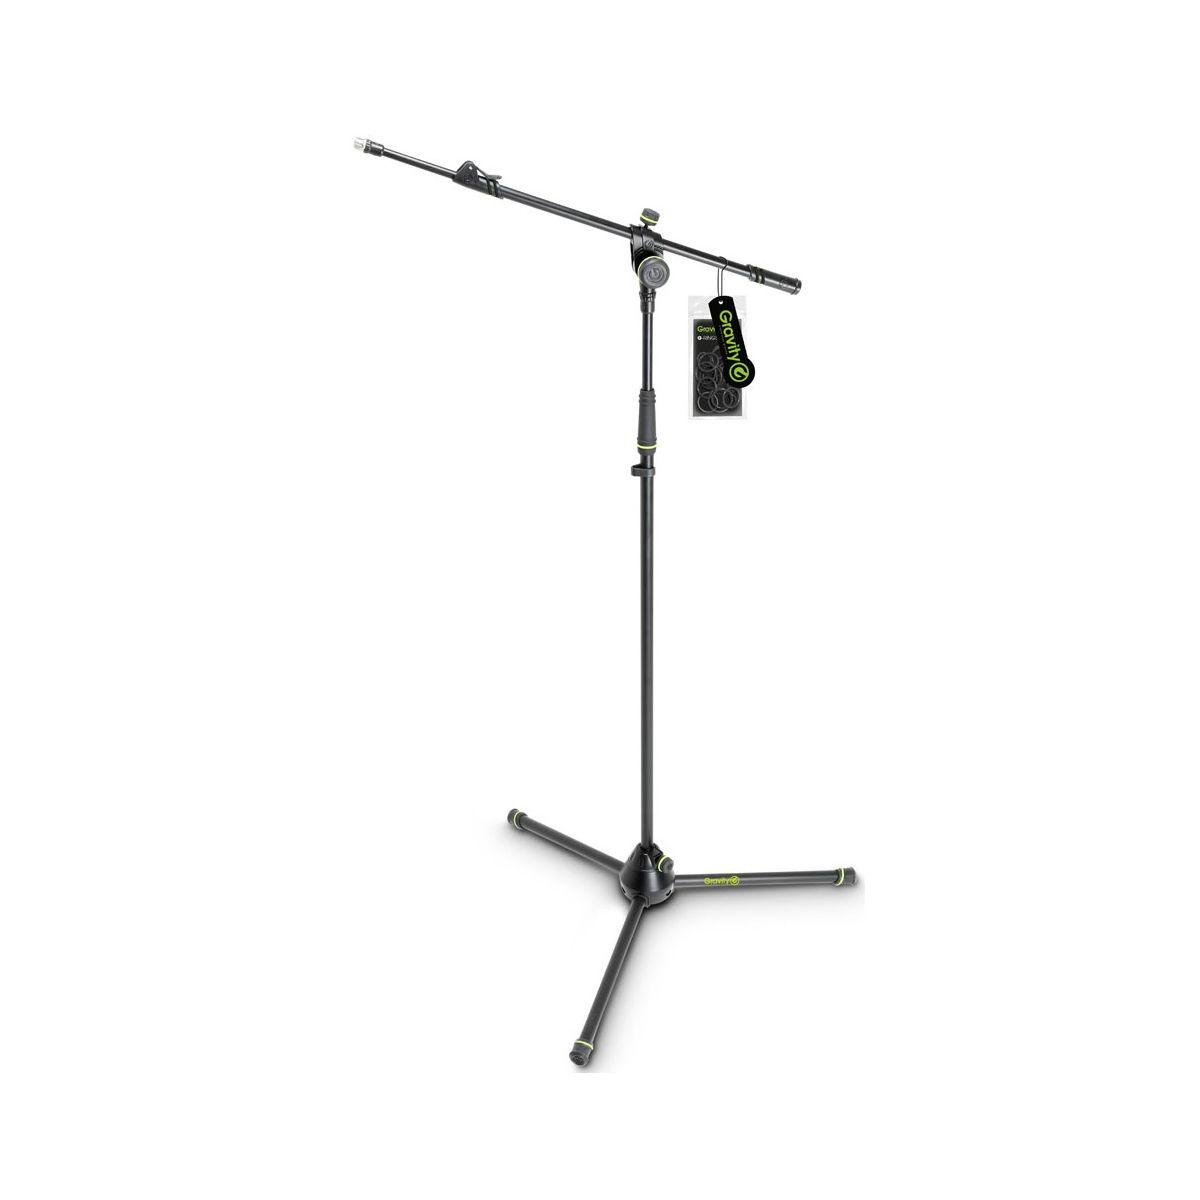 Pieds micros perches - Gravity - MS 4322 B